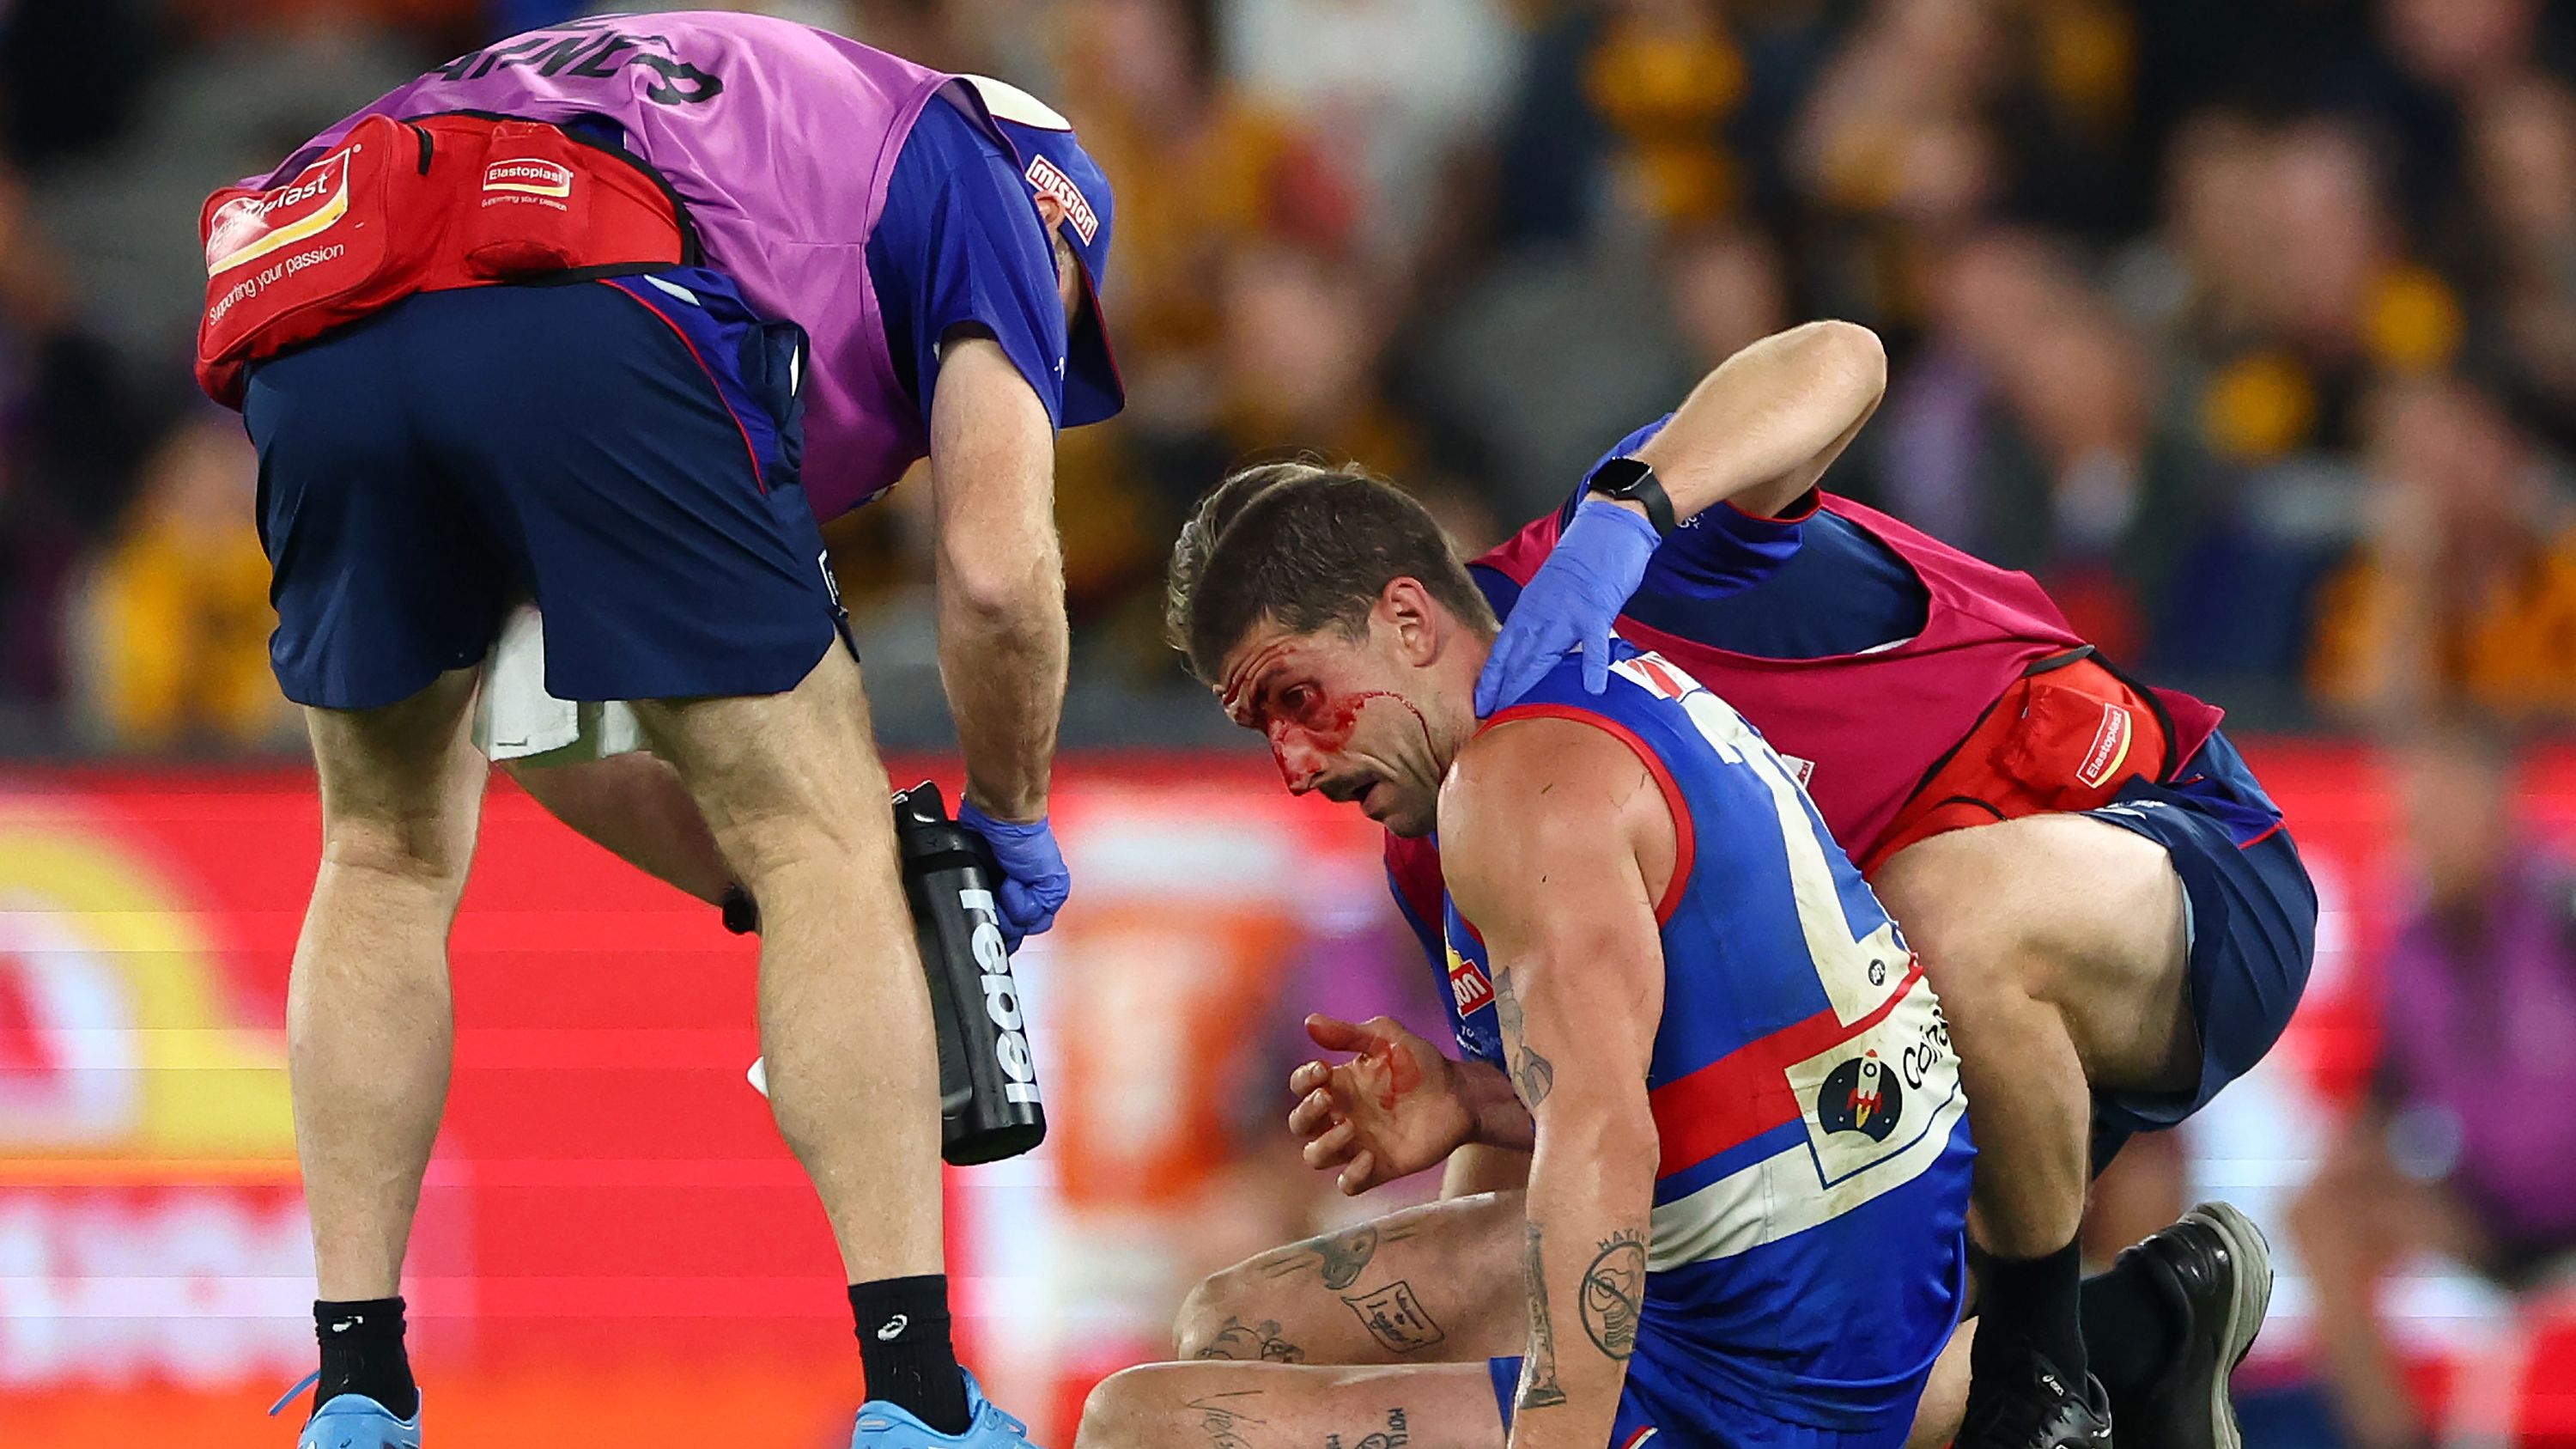 Liberatore copped a boot to the head.